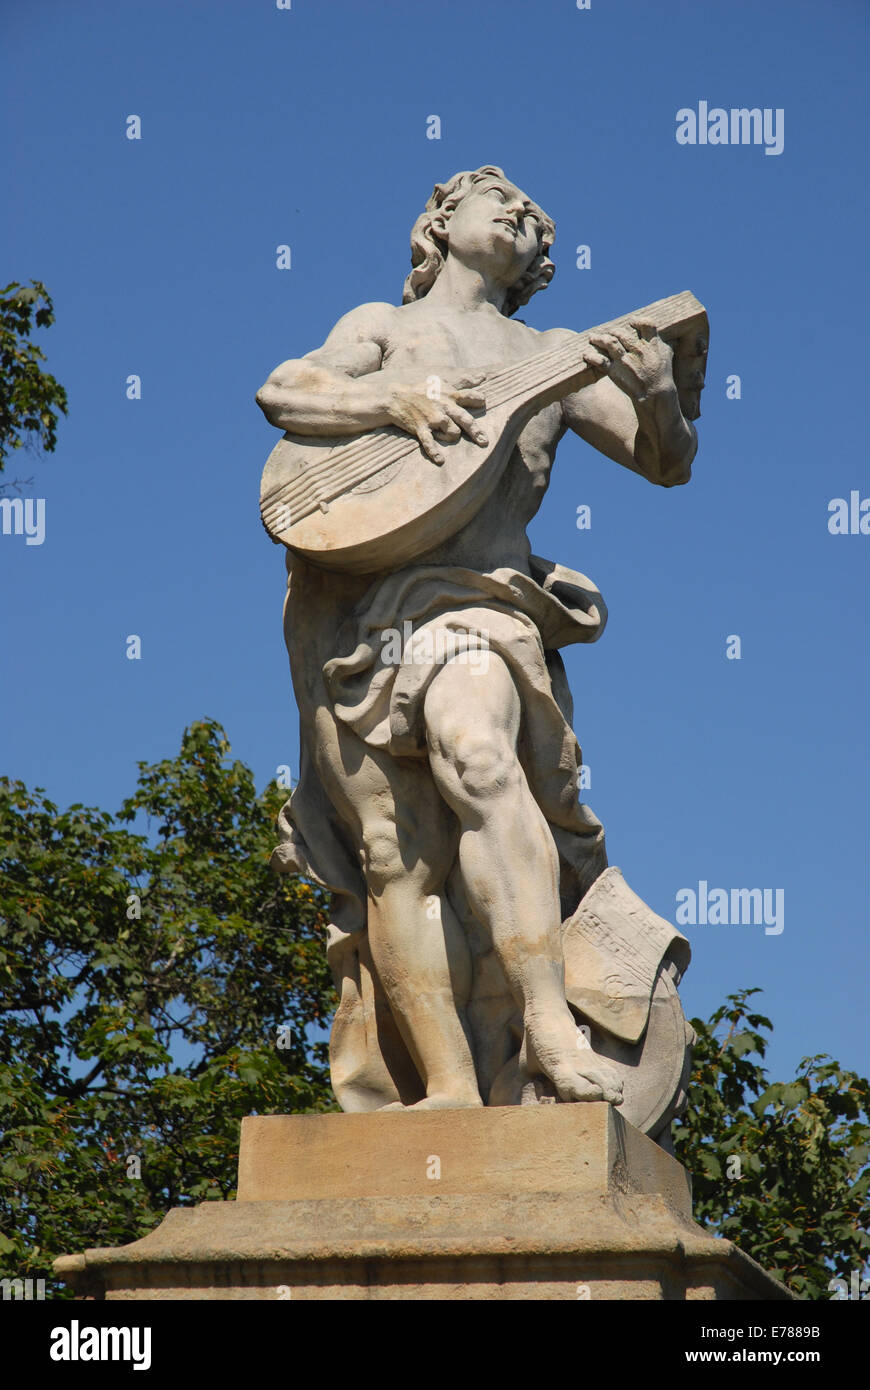 a statue of a musician in the garden of Ksiaz Castle, Walbrzych, Lower Silesia, Poland Stock Photo